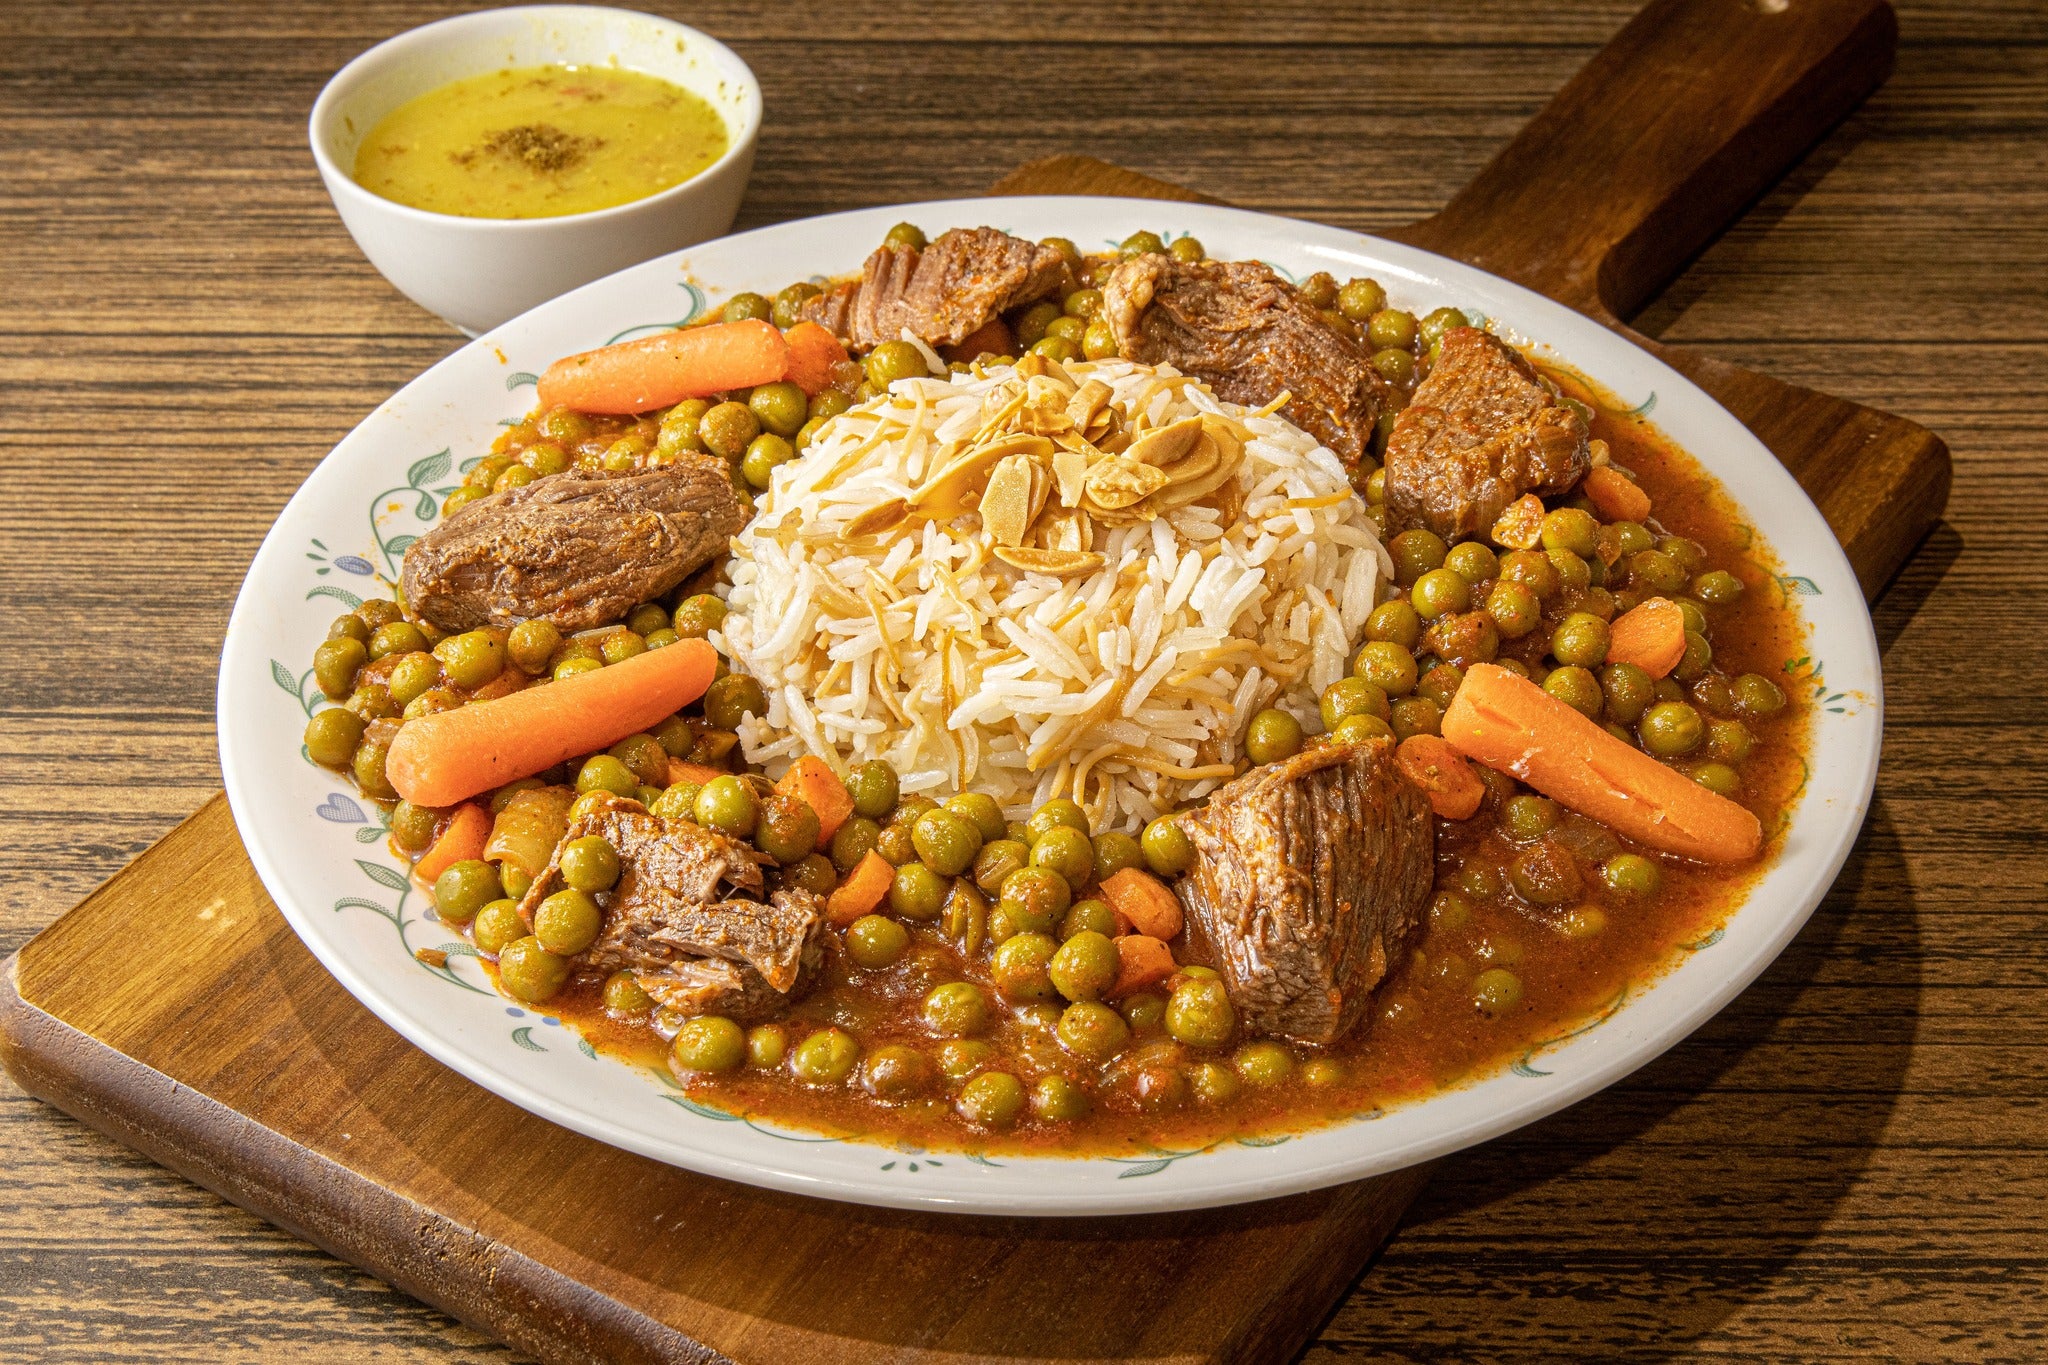 Bazella with rice, carrots and meat